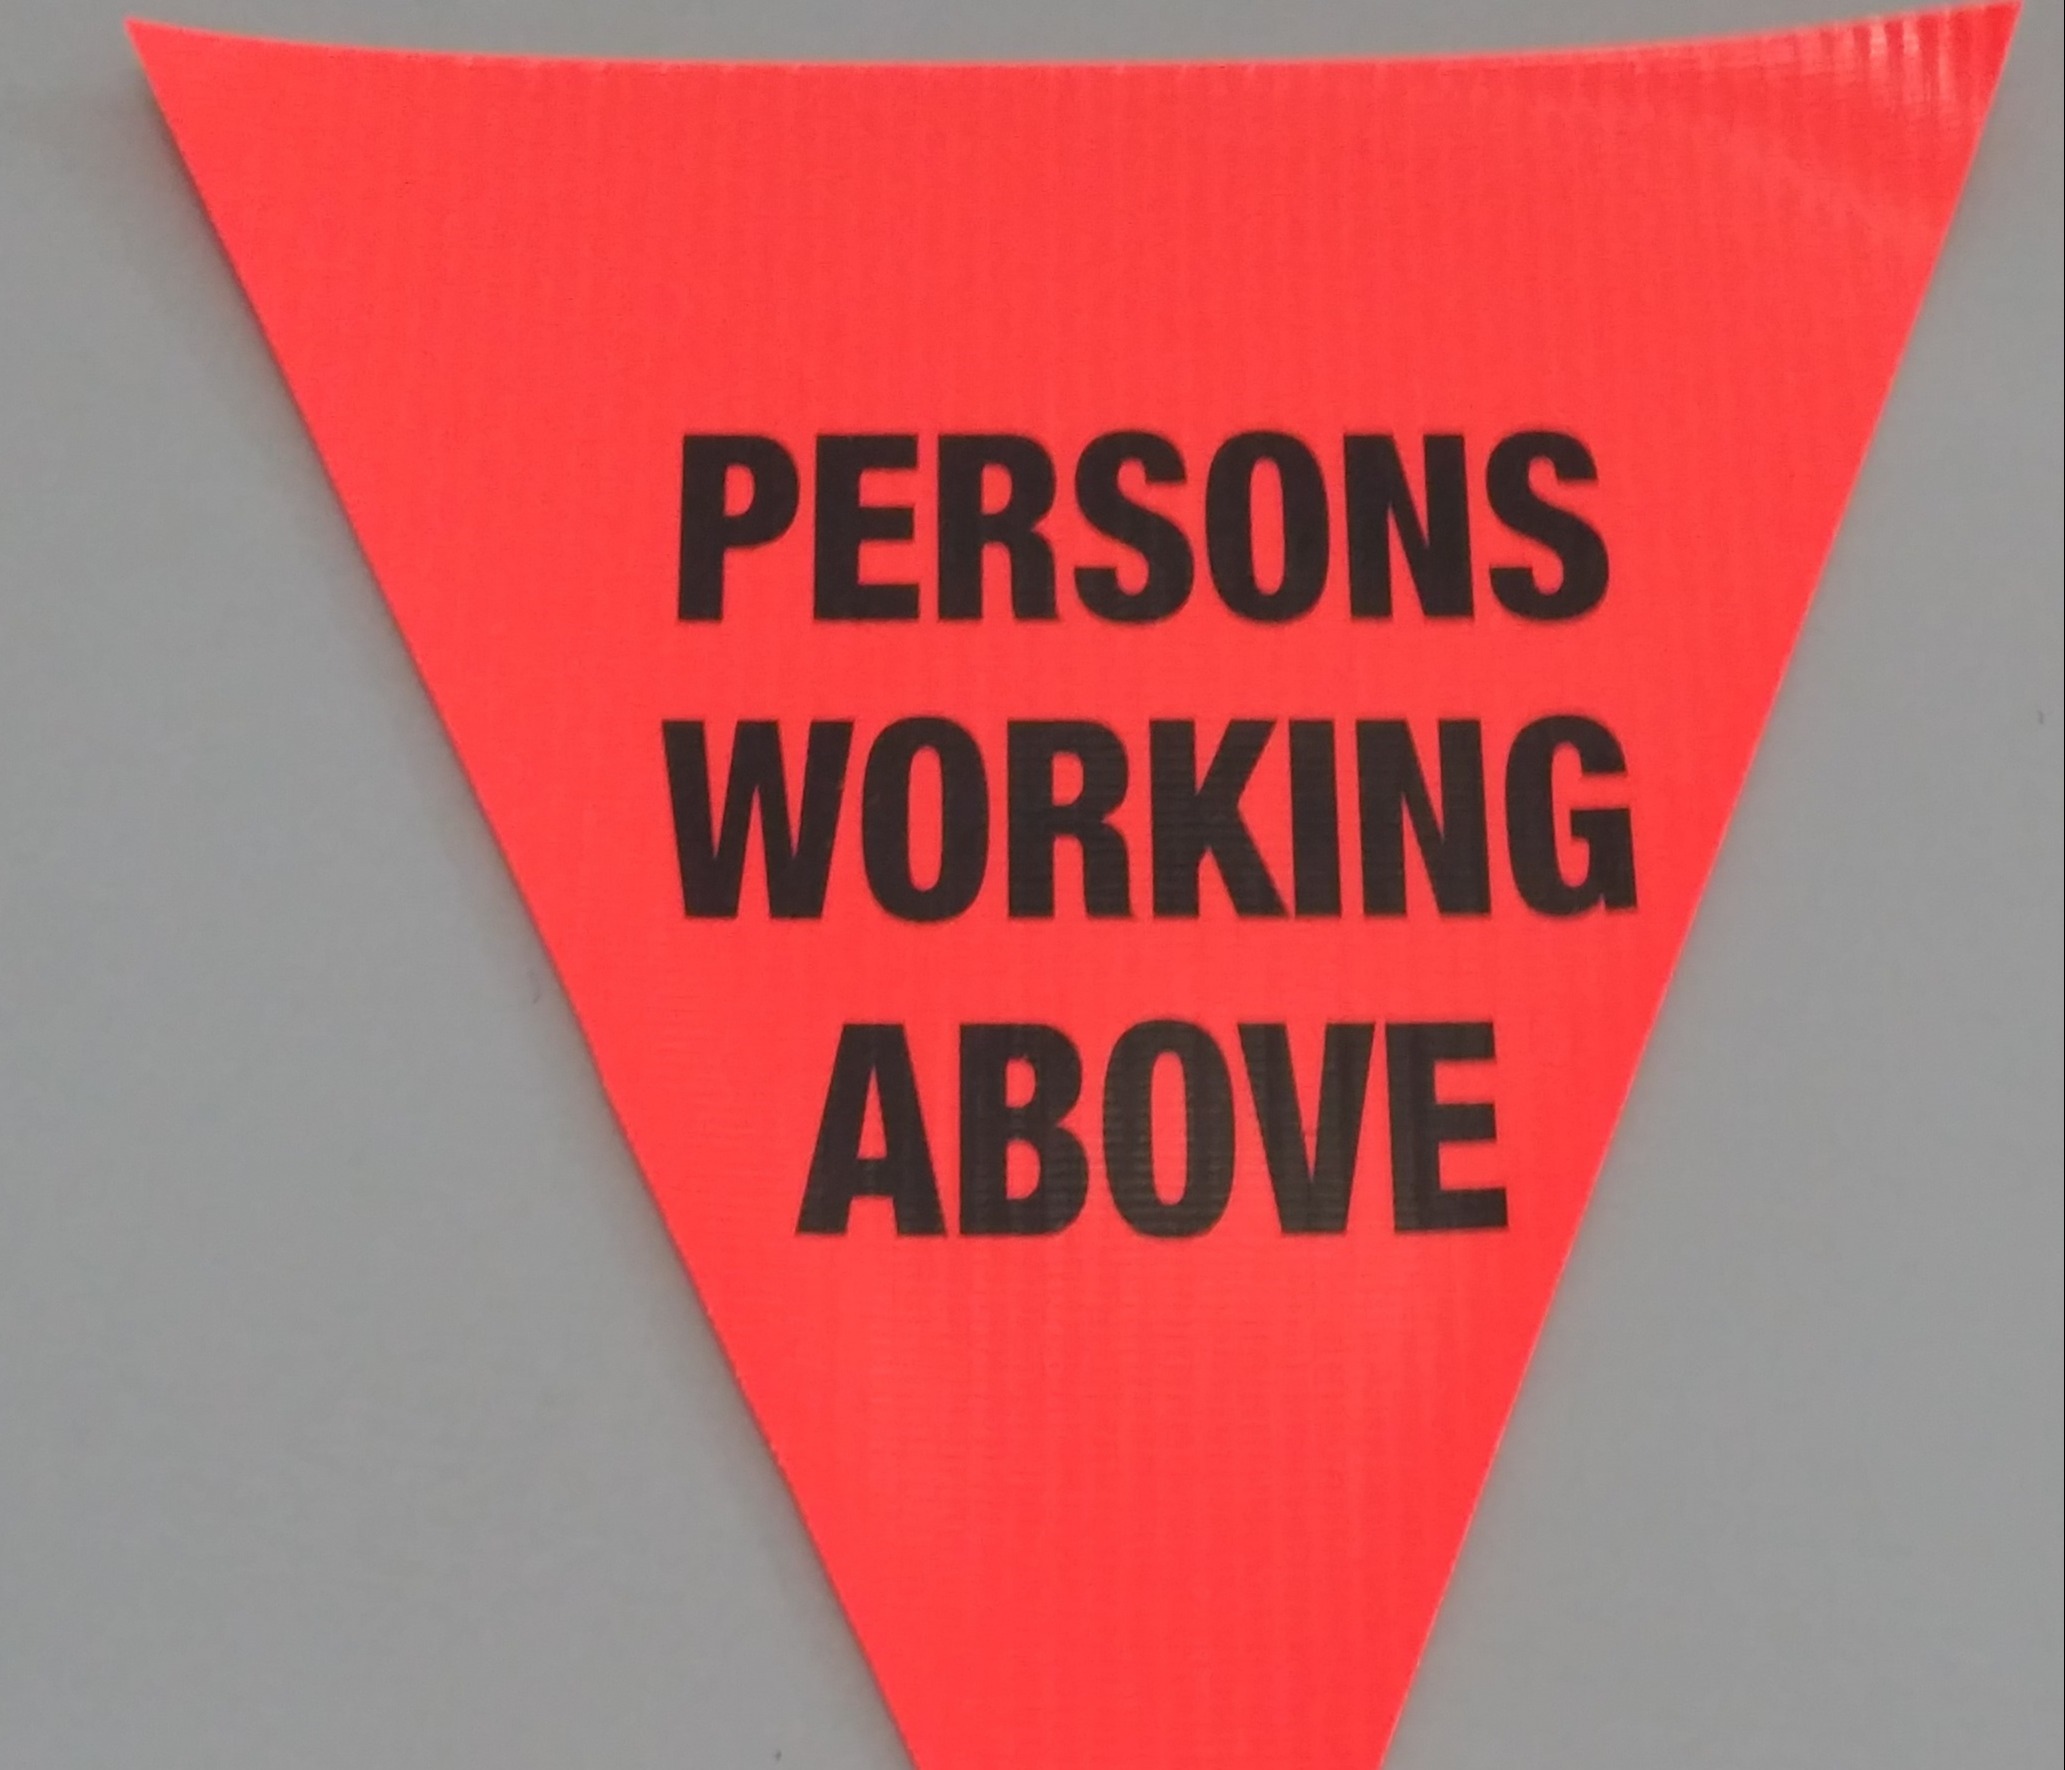 Persons Working Above (orange)